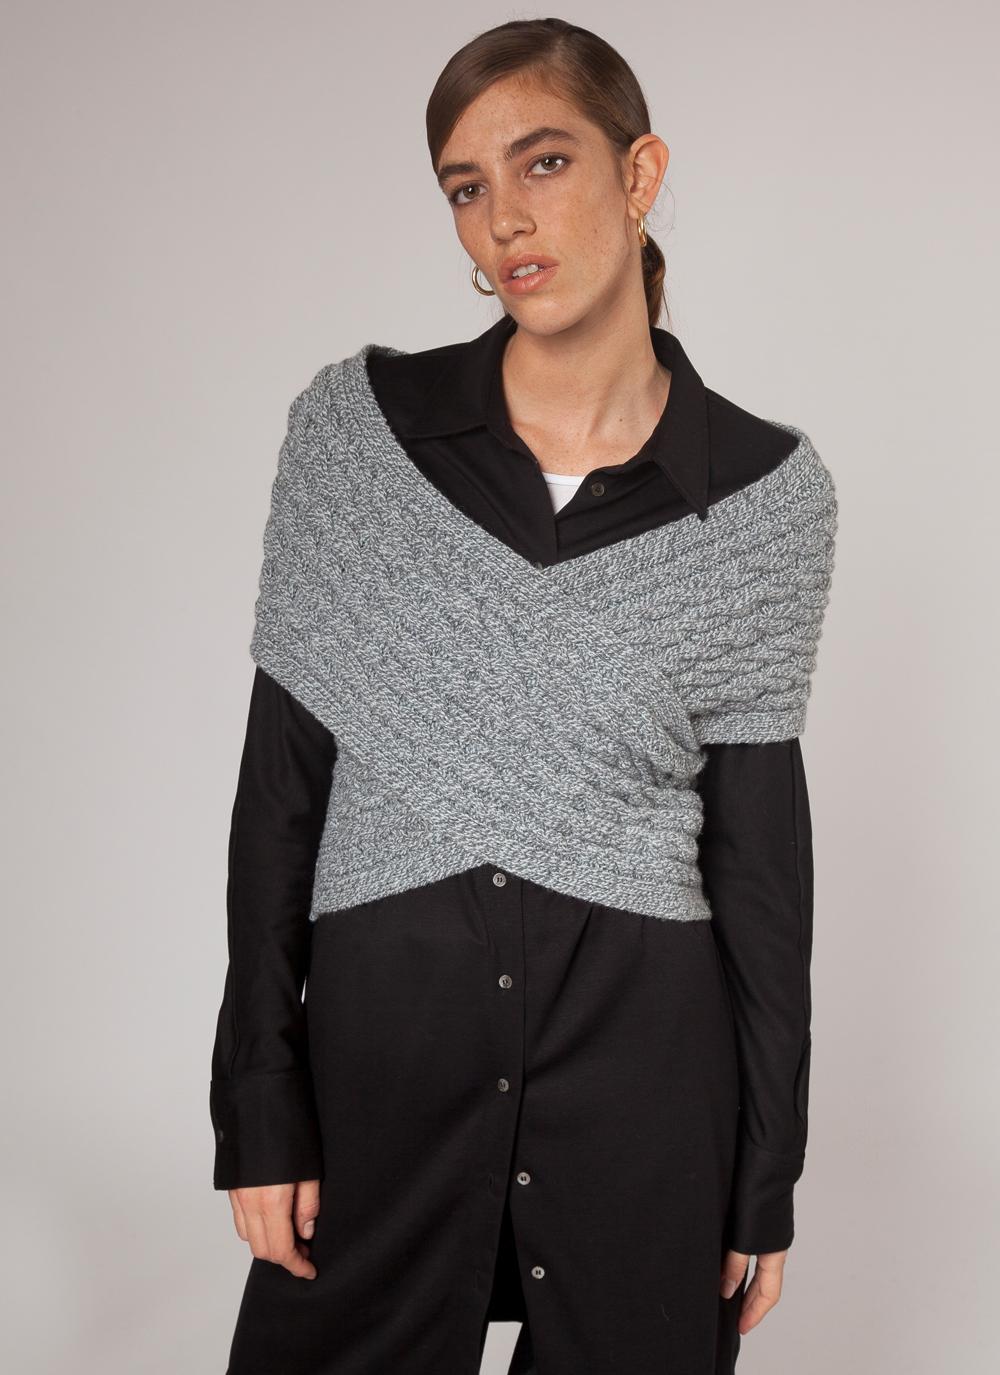 Women's Outlander Style Merino Wool and Cashmere Wrap